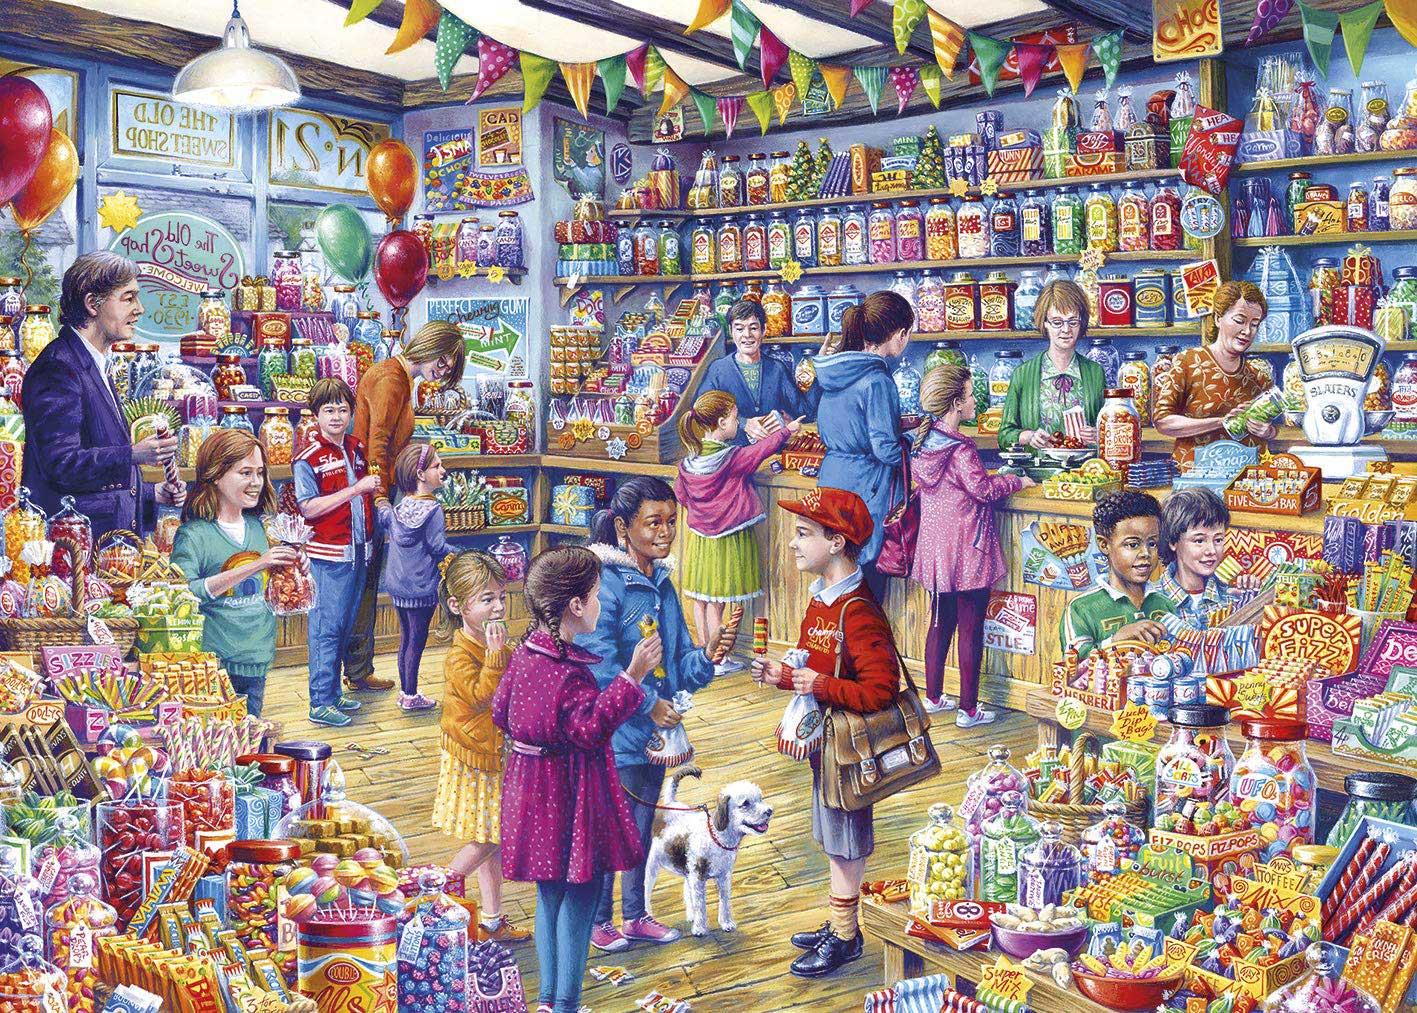 Gibsons The Old Sweet Shop Jigsaw Puzzle (1000 Pieces)